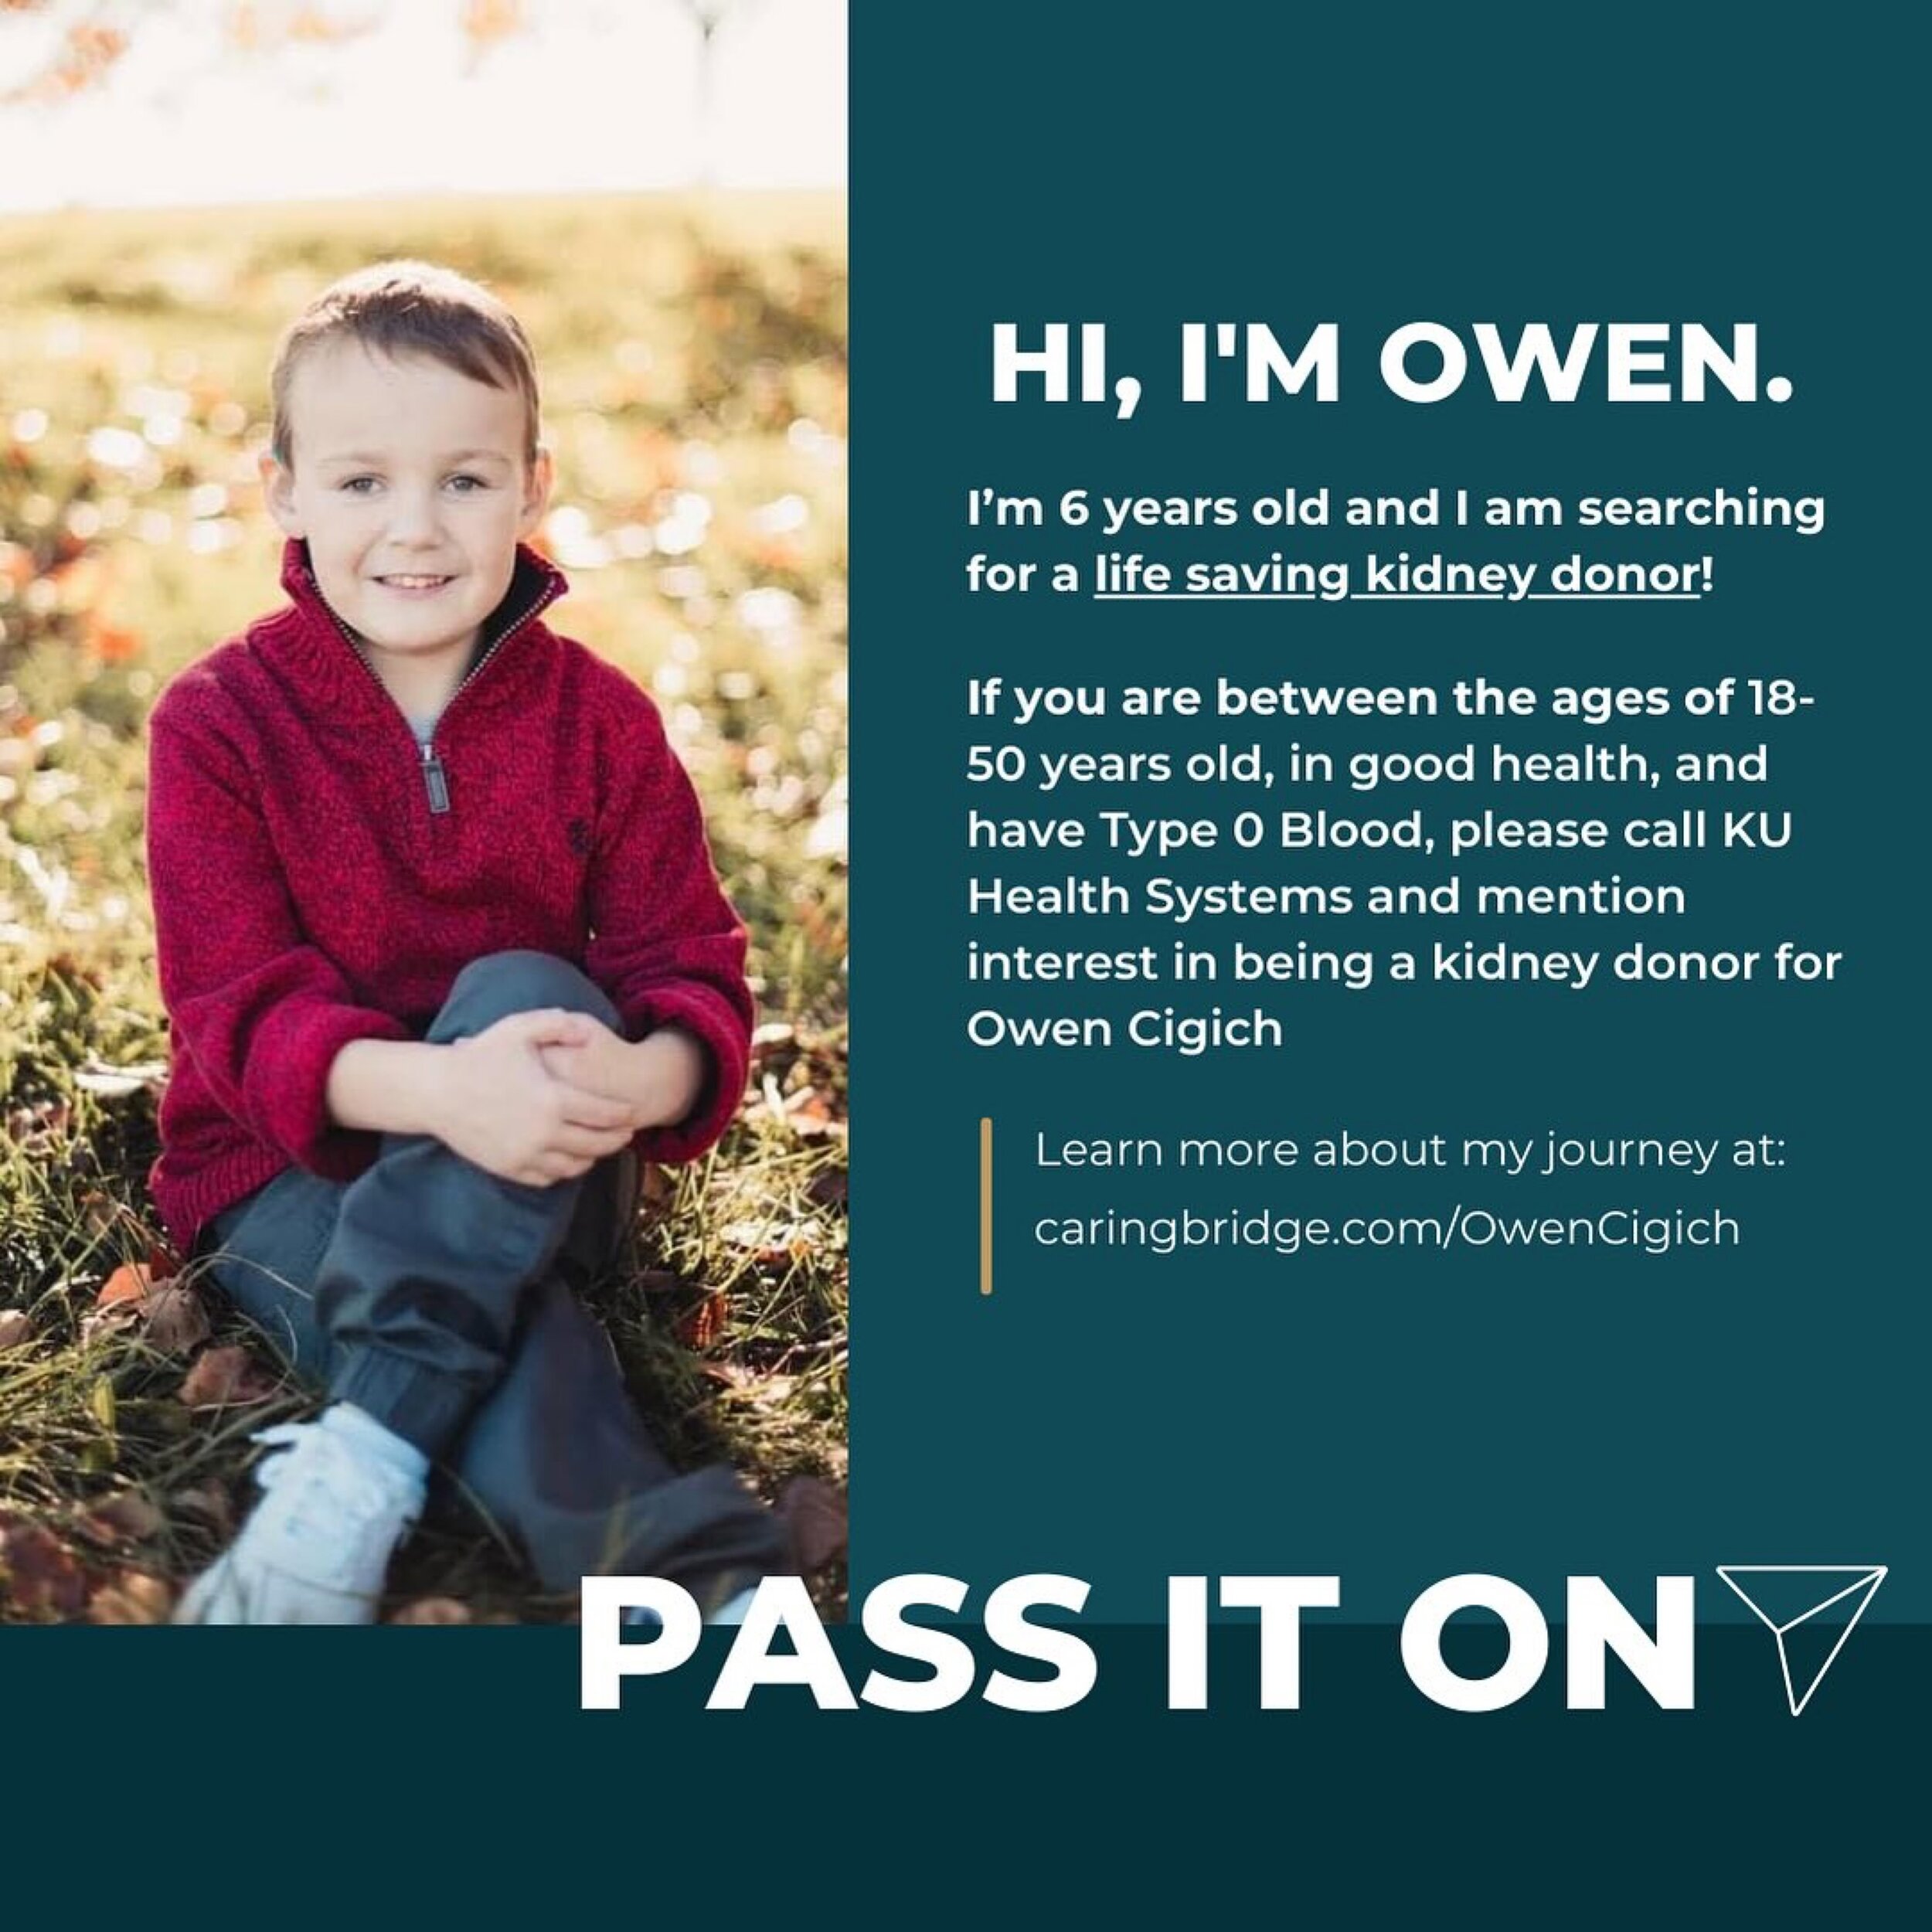 Let&rsquo;s raise awareness about Owen and his search for a kidney donor 💚💙 #donatelife #shareyourspare #organdonation #livingdonorneeded #Repost @kc_developmental_therapies
・・・
PLEASE SHARE to help Owen find his match and follow his journey at car